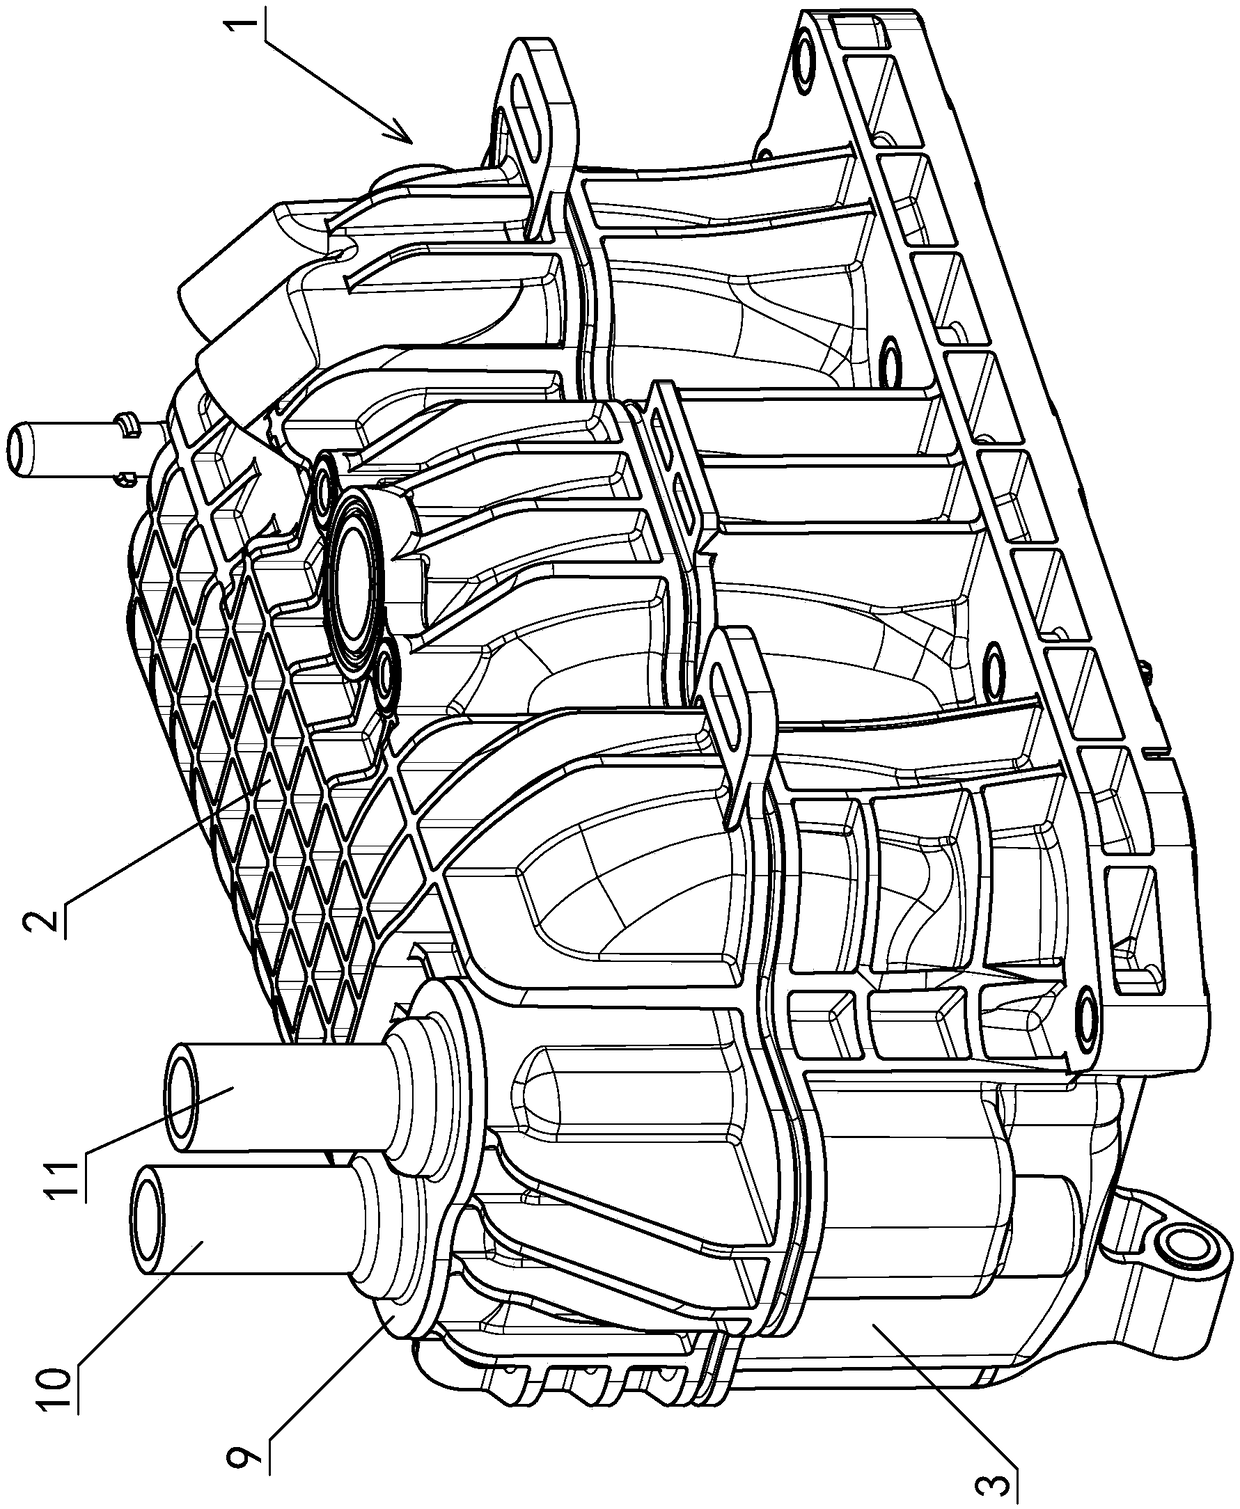 An engine intake manifold with a built-in cooler and high sealing performance